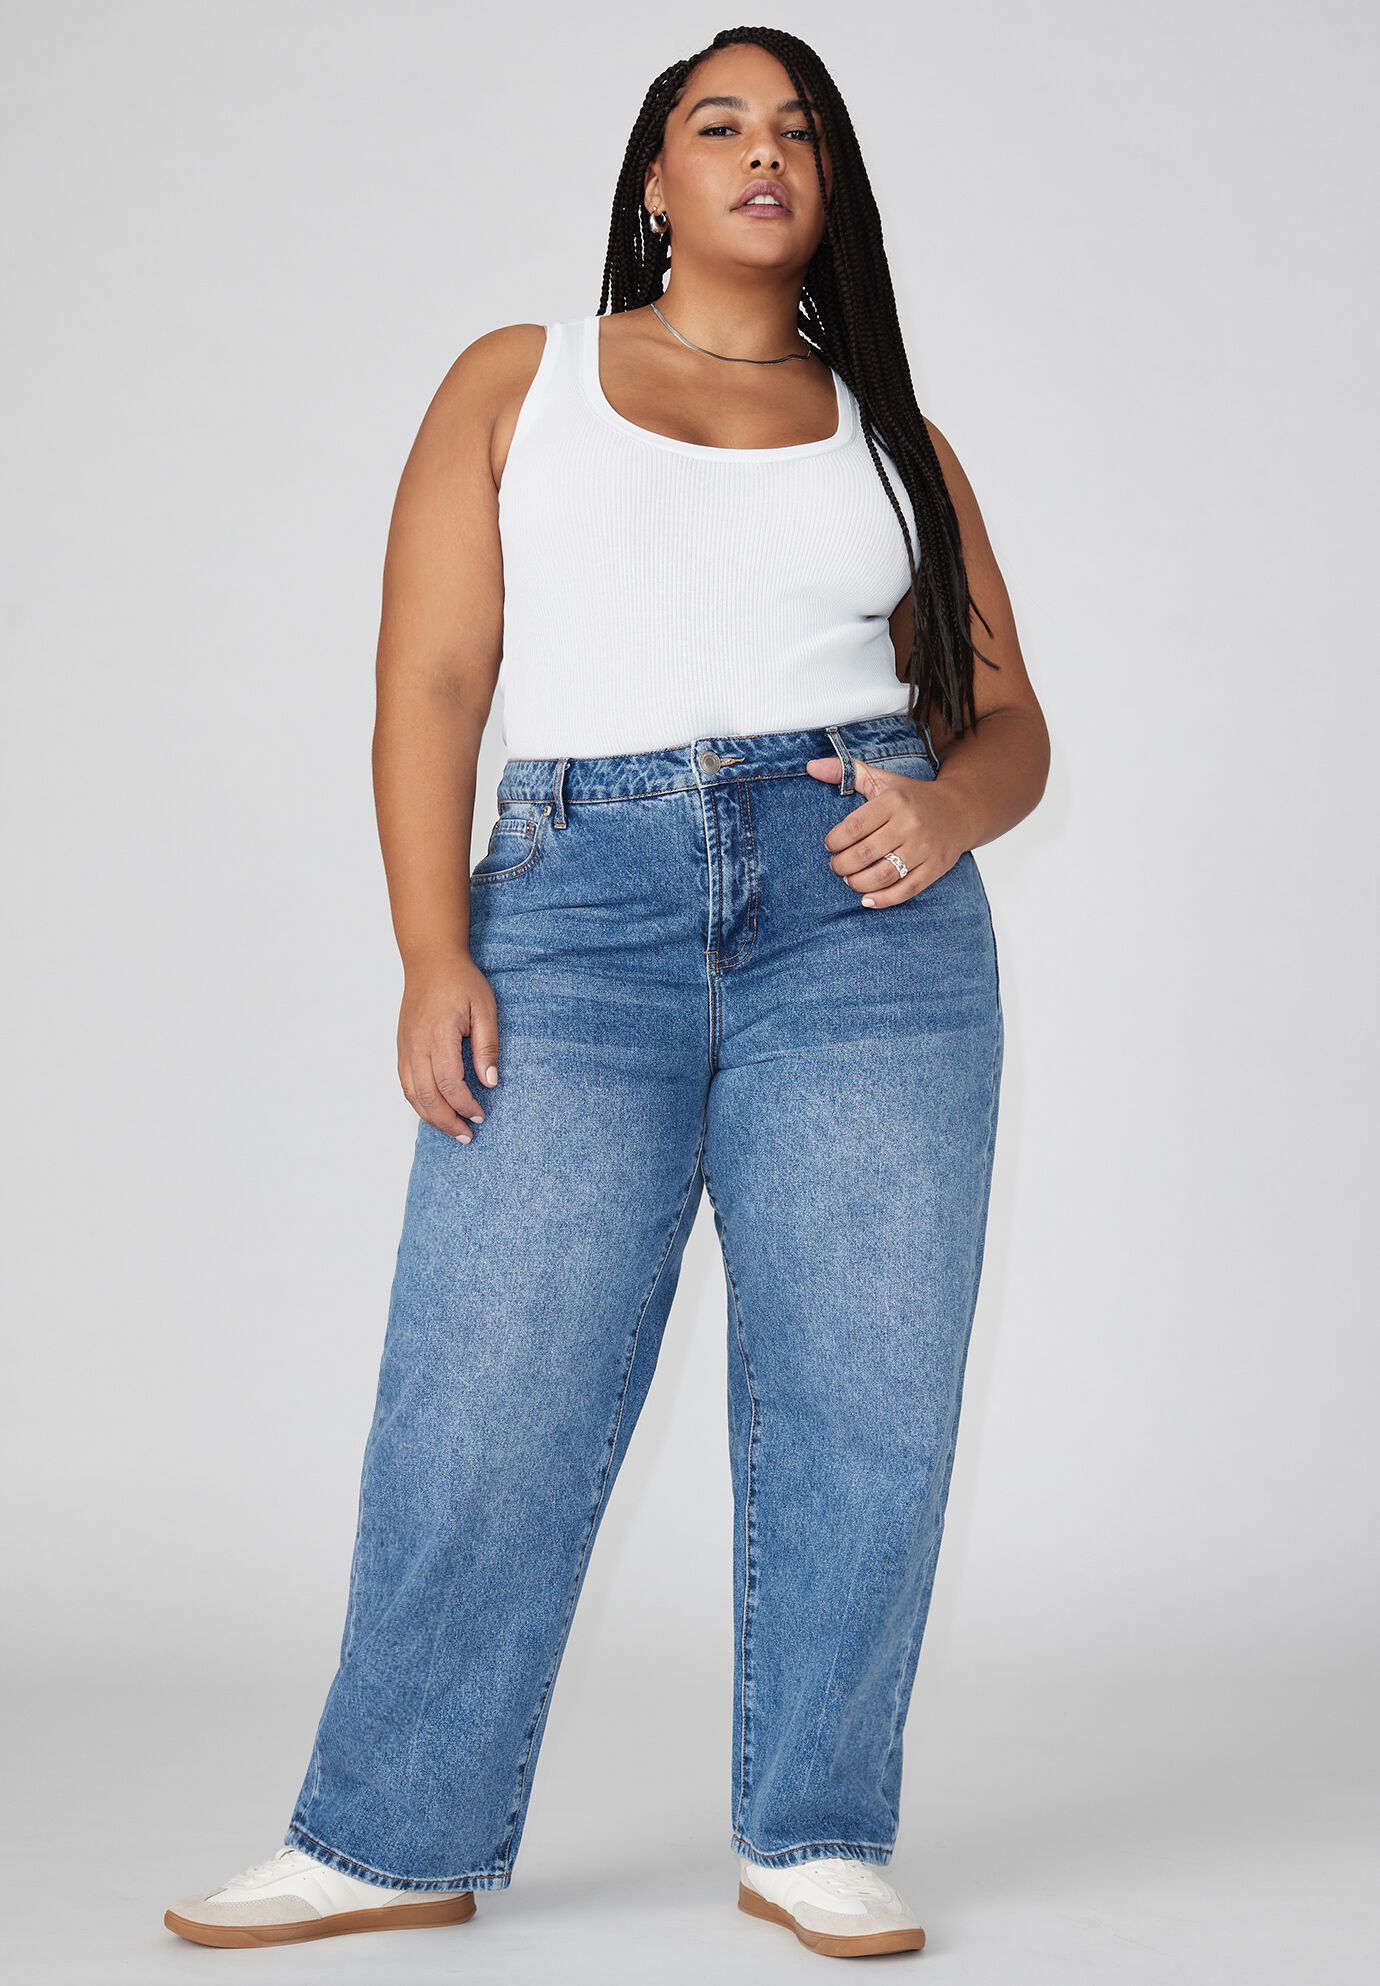 Plus Size Women The Loose Jean By ( Size 24 )